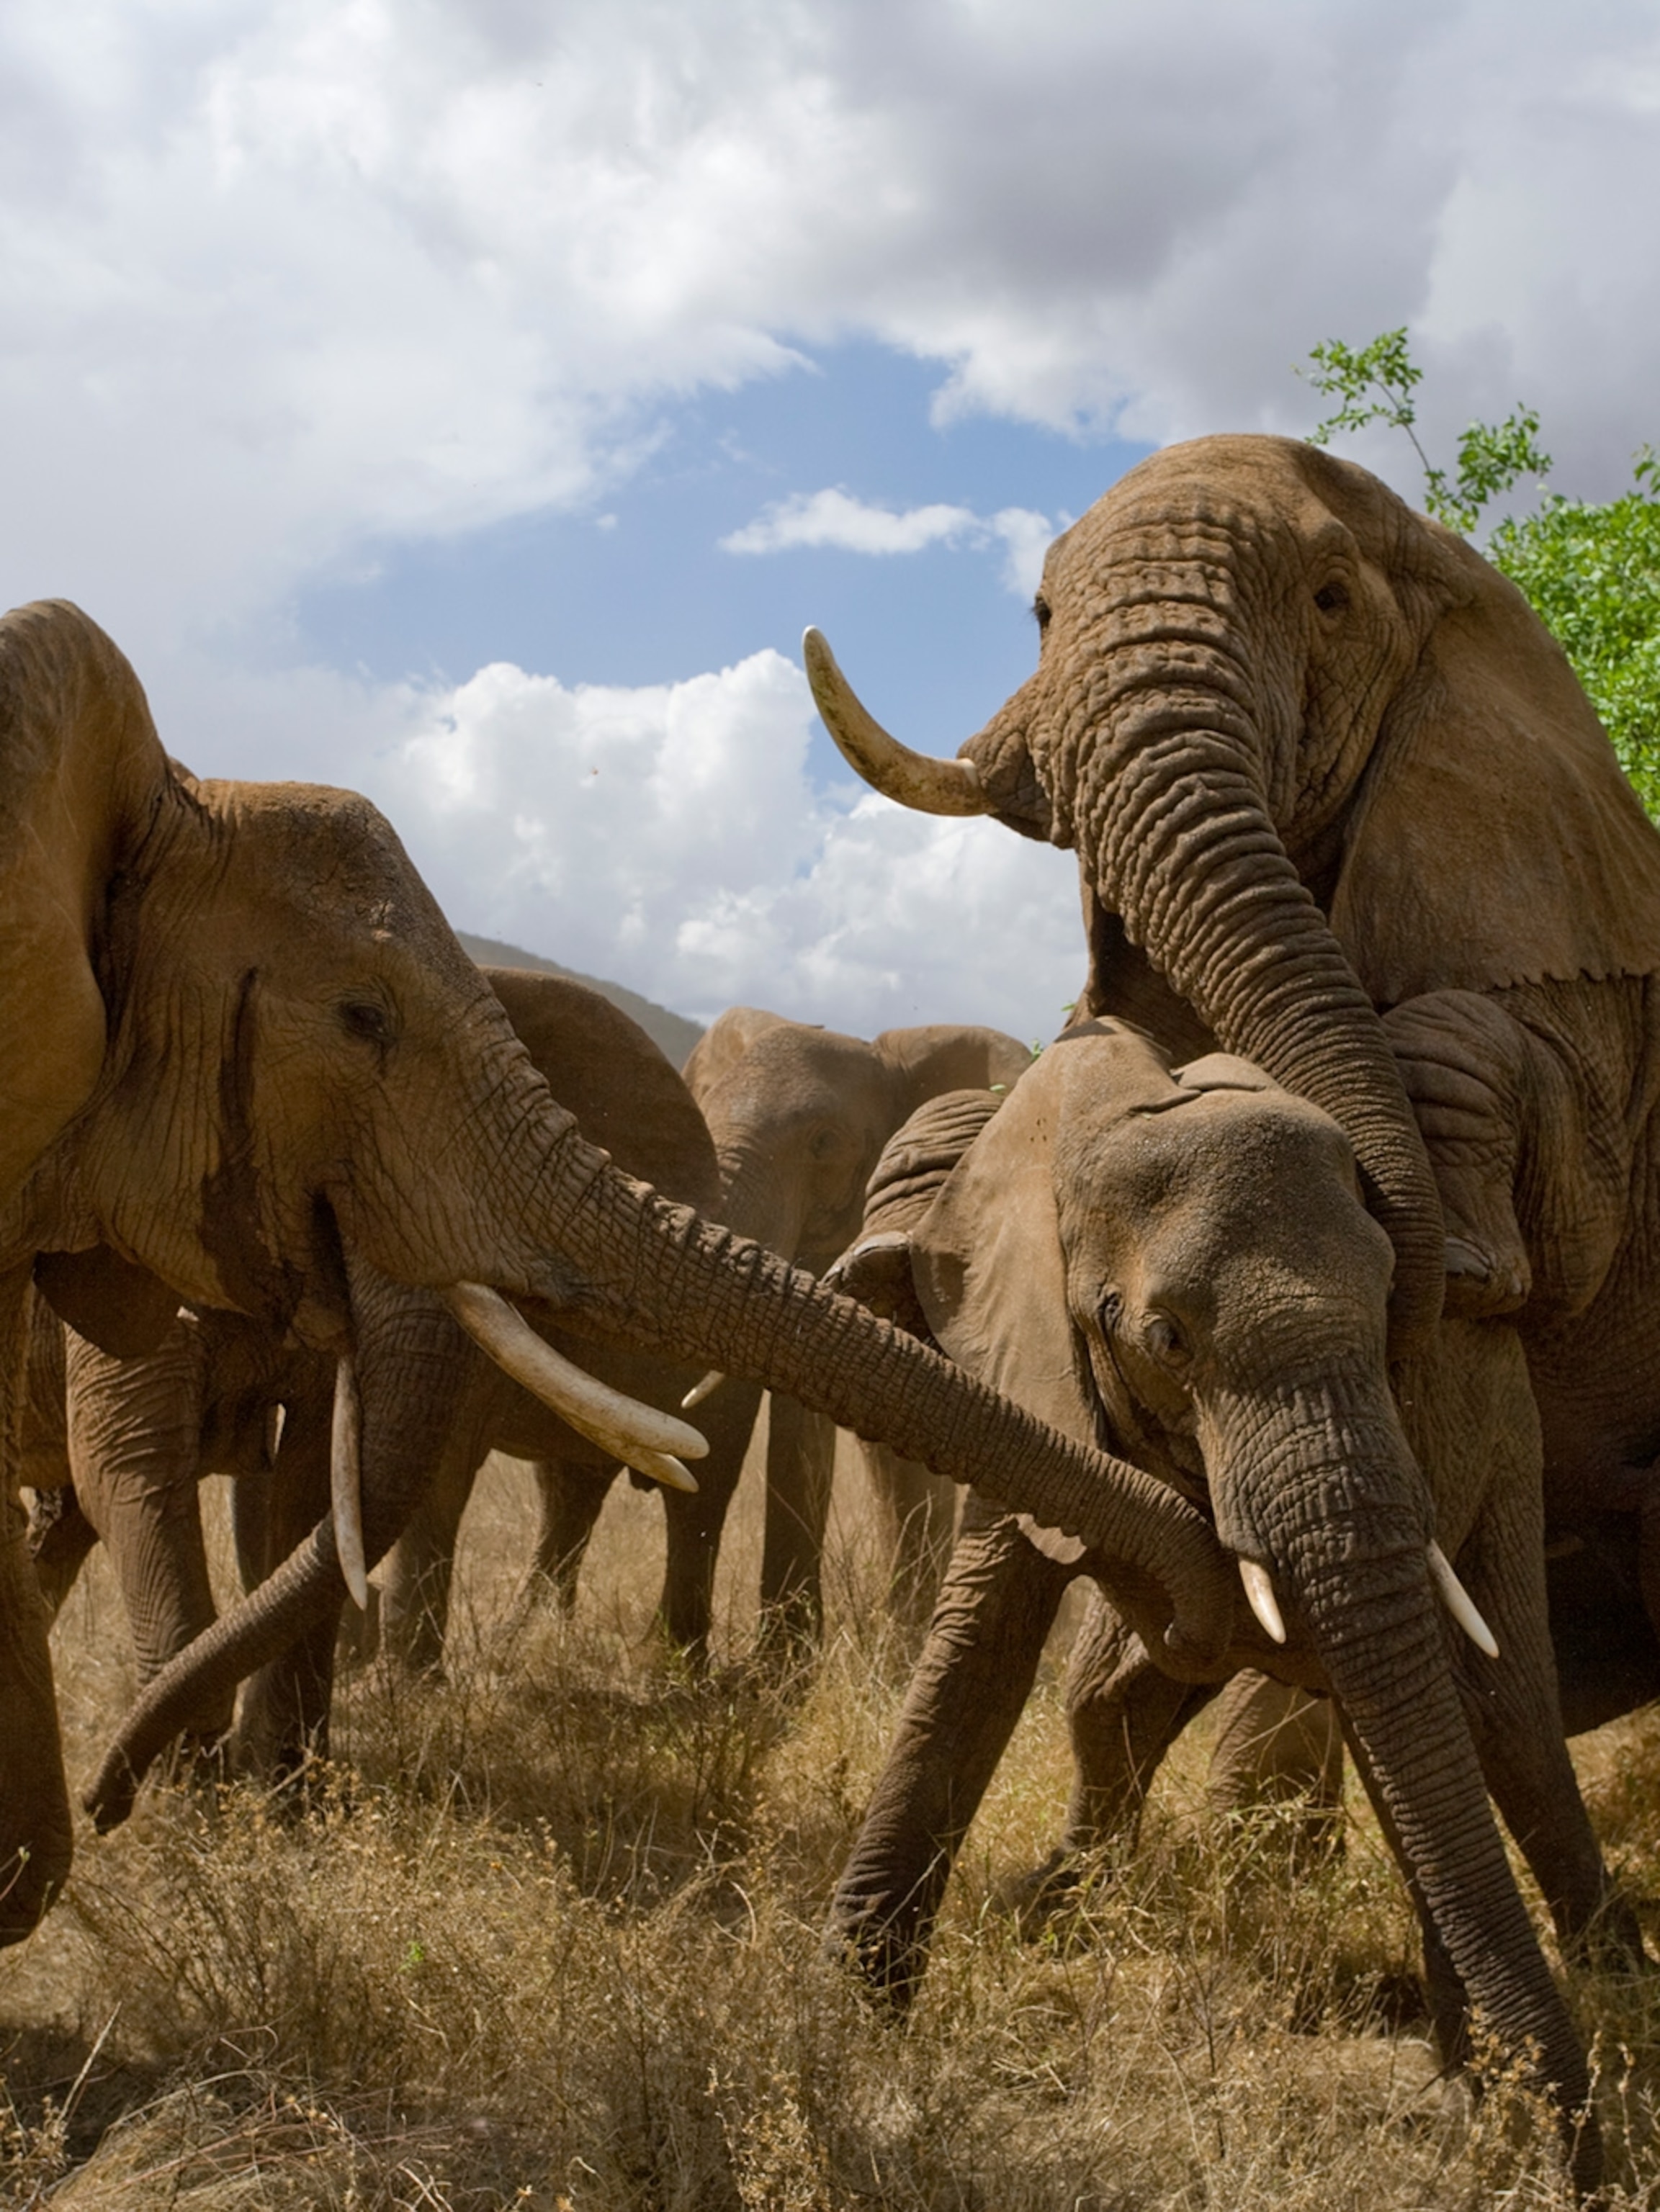 What time of year do African elephants mate?